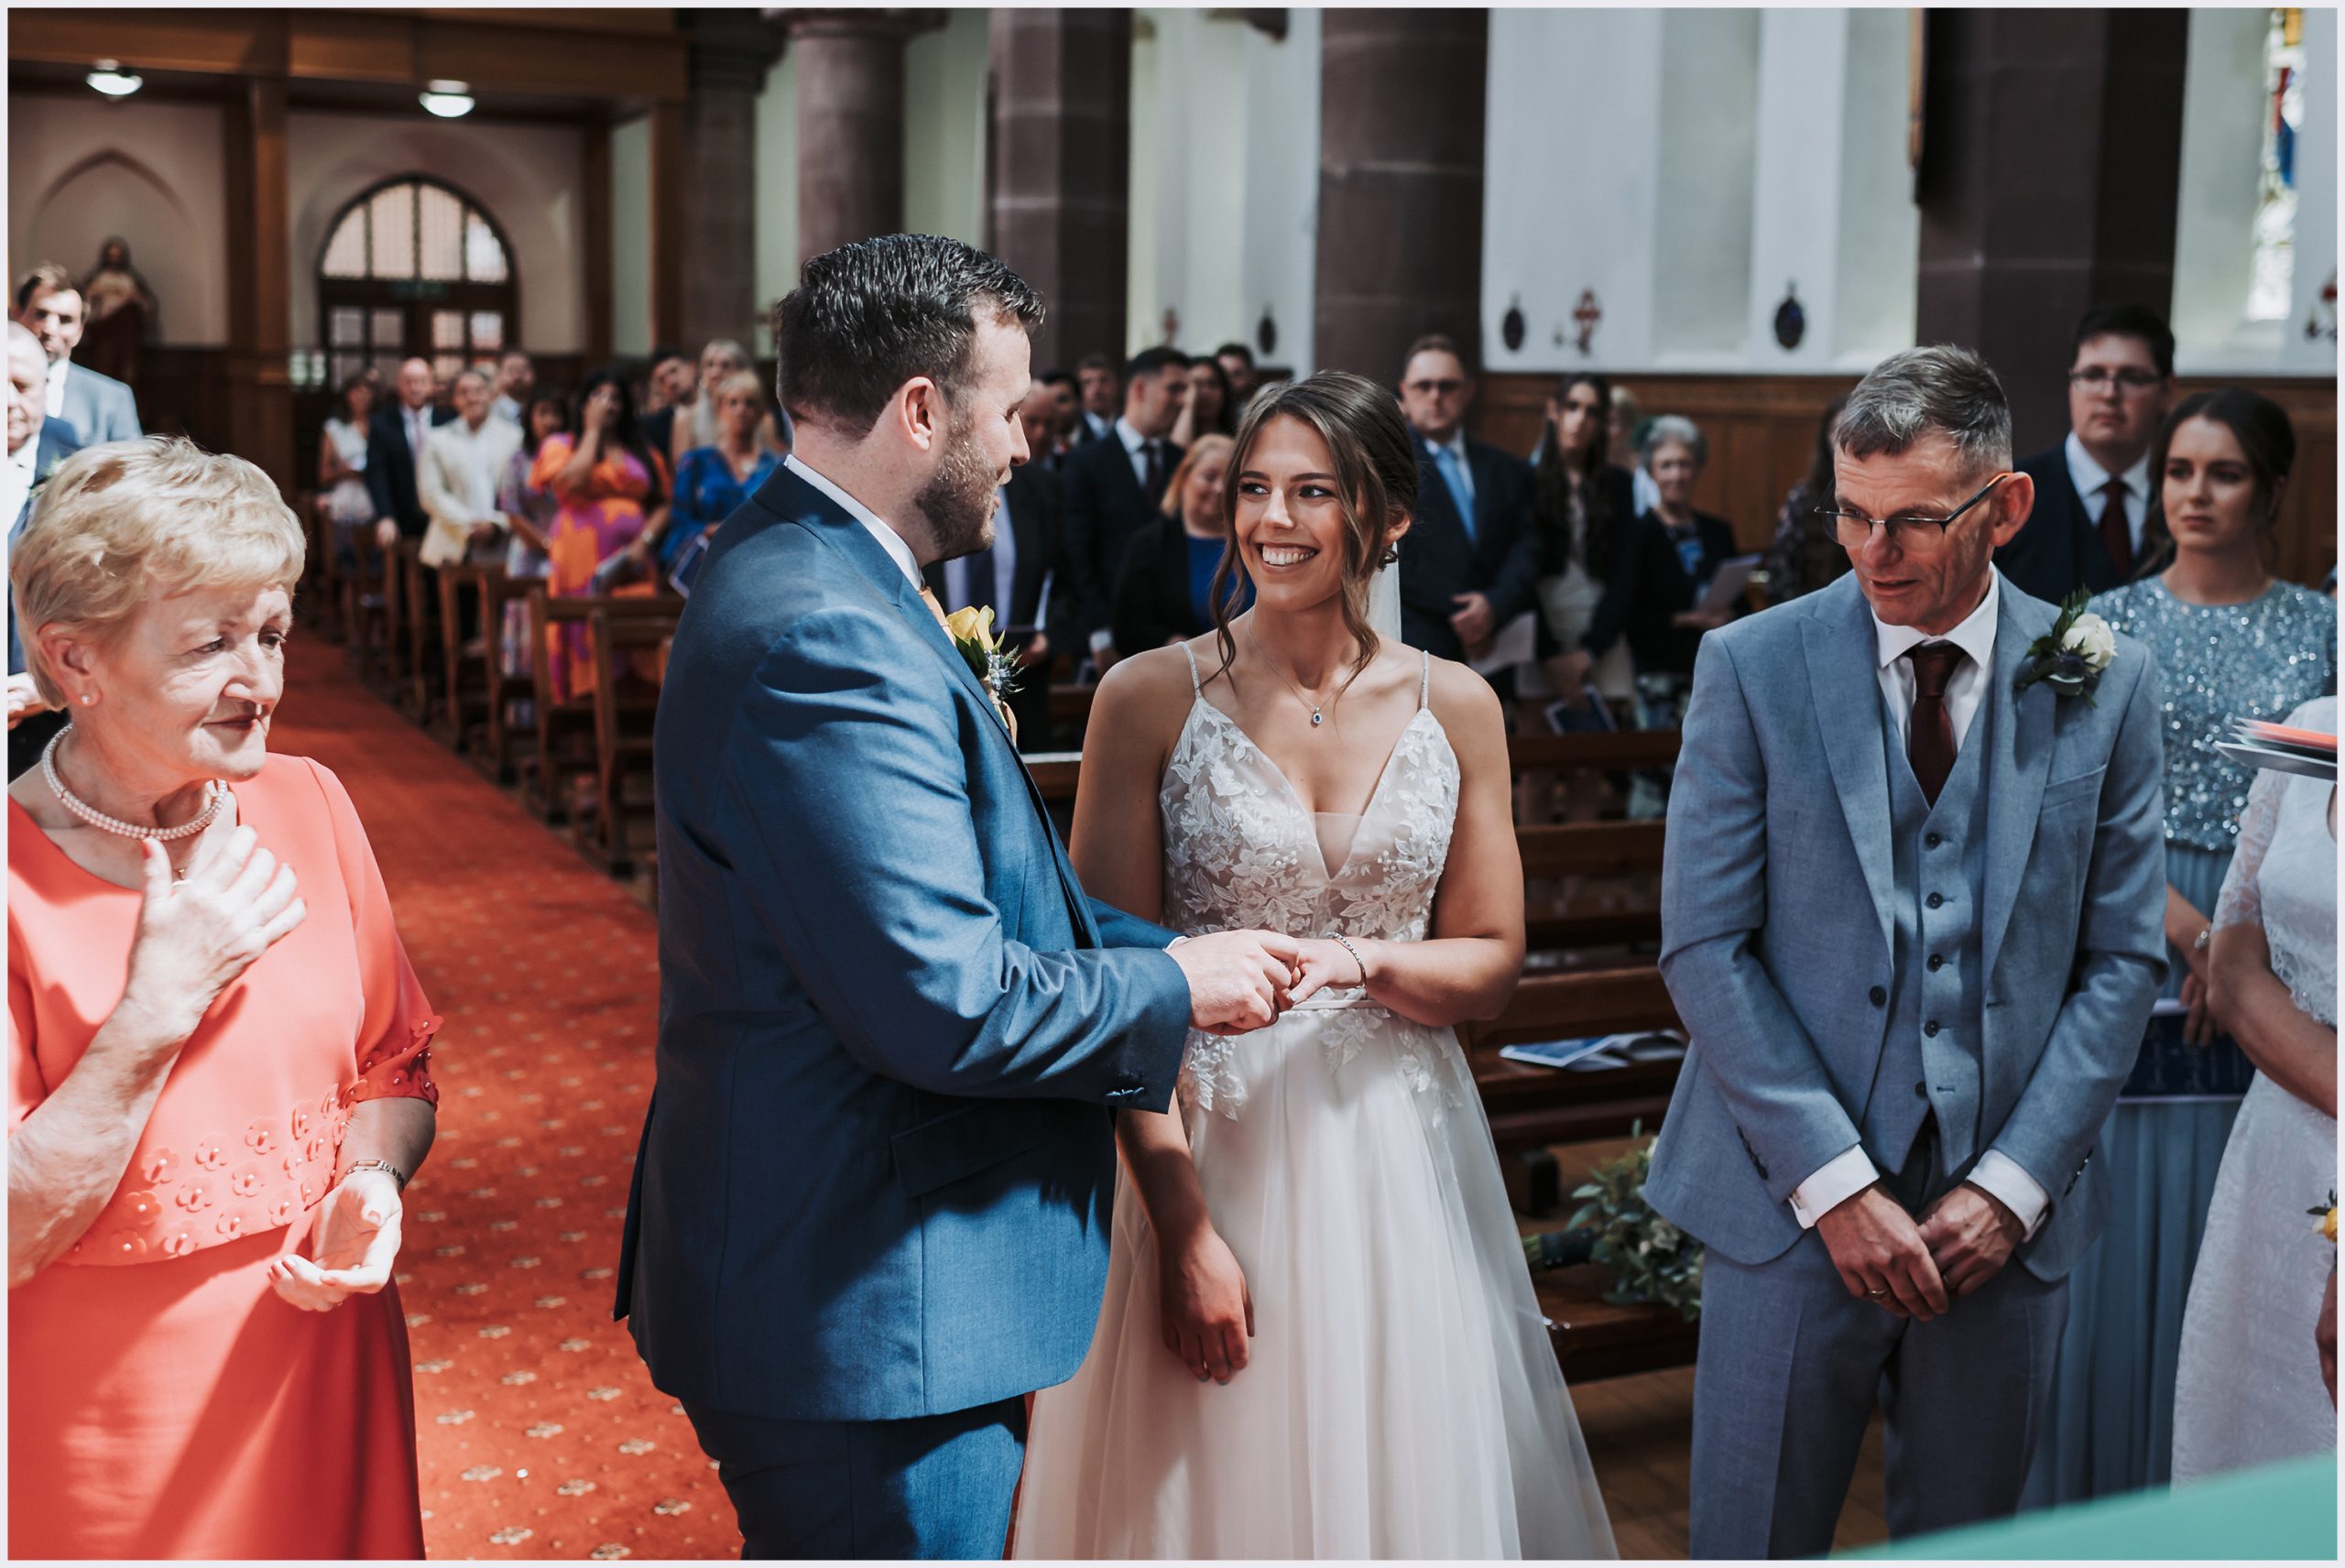 A groom places the wedding ring onto his wife's finger during their church wedding ceremony.  Image captured by Helena Jayne Photography a wedding photographer based in Chester